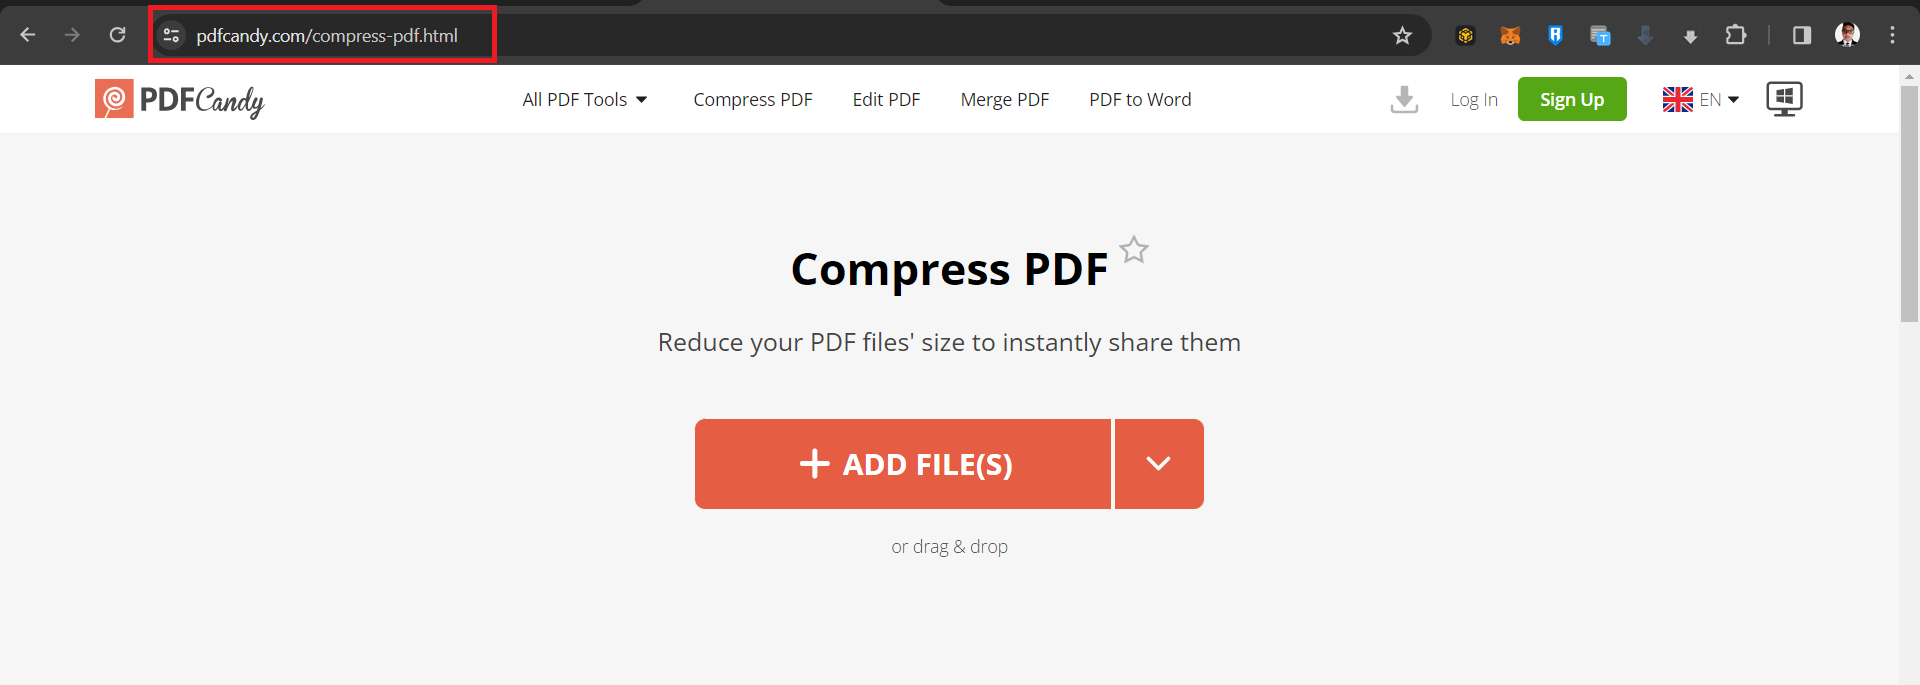 How To Use PDFCandy Online Compressor: Step 1